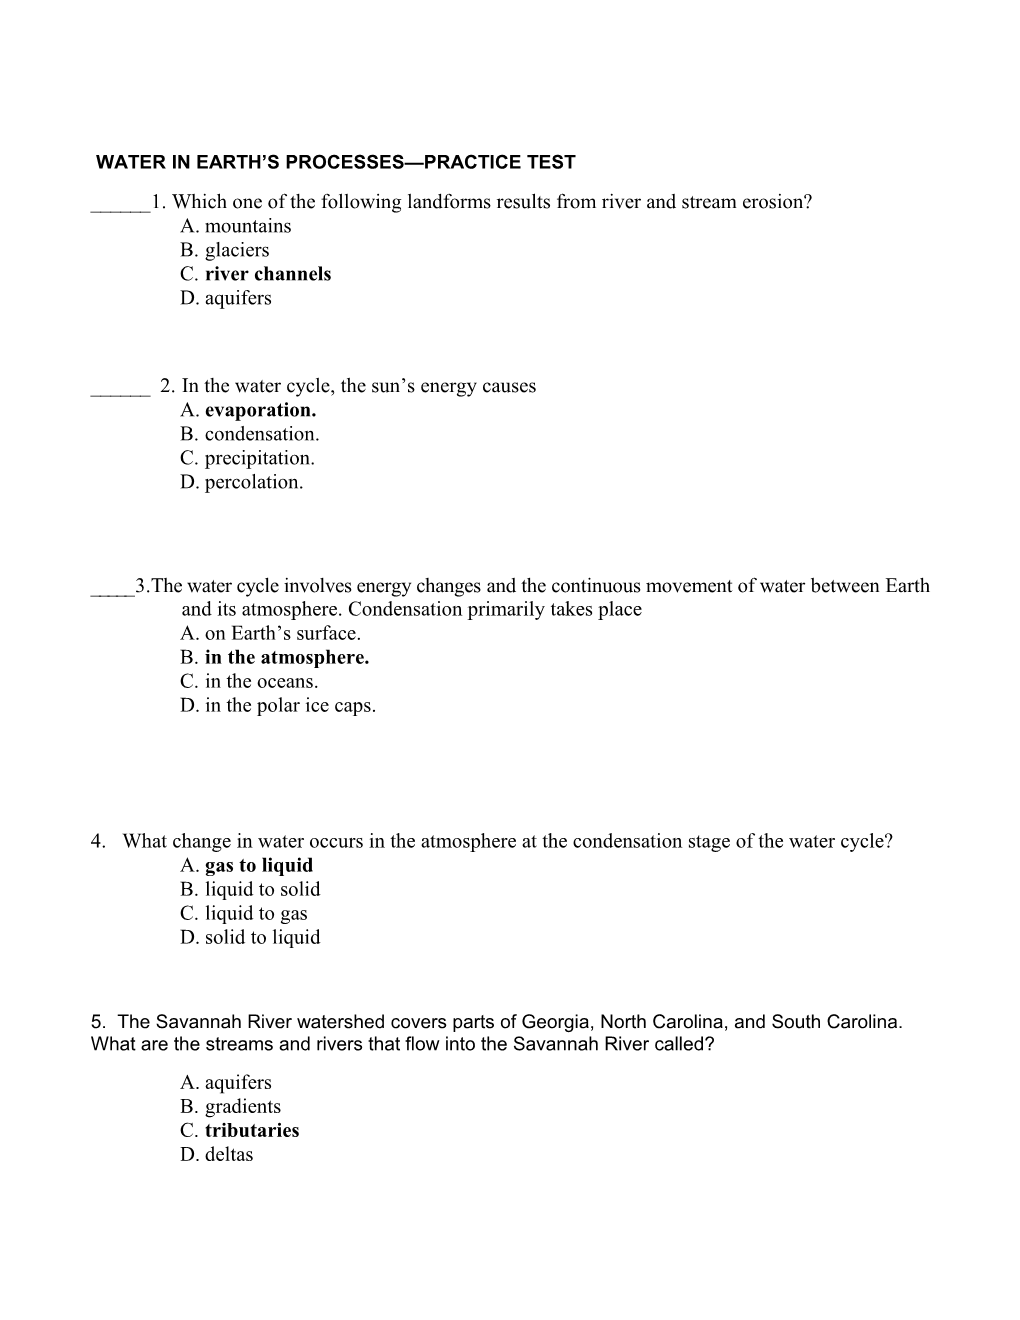 WATER in EARTH S PROCESSES Practice Test